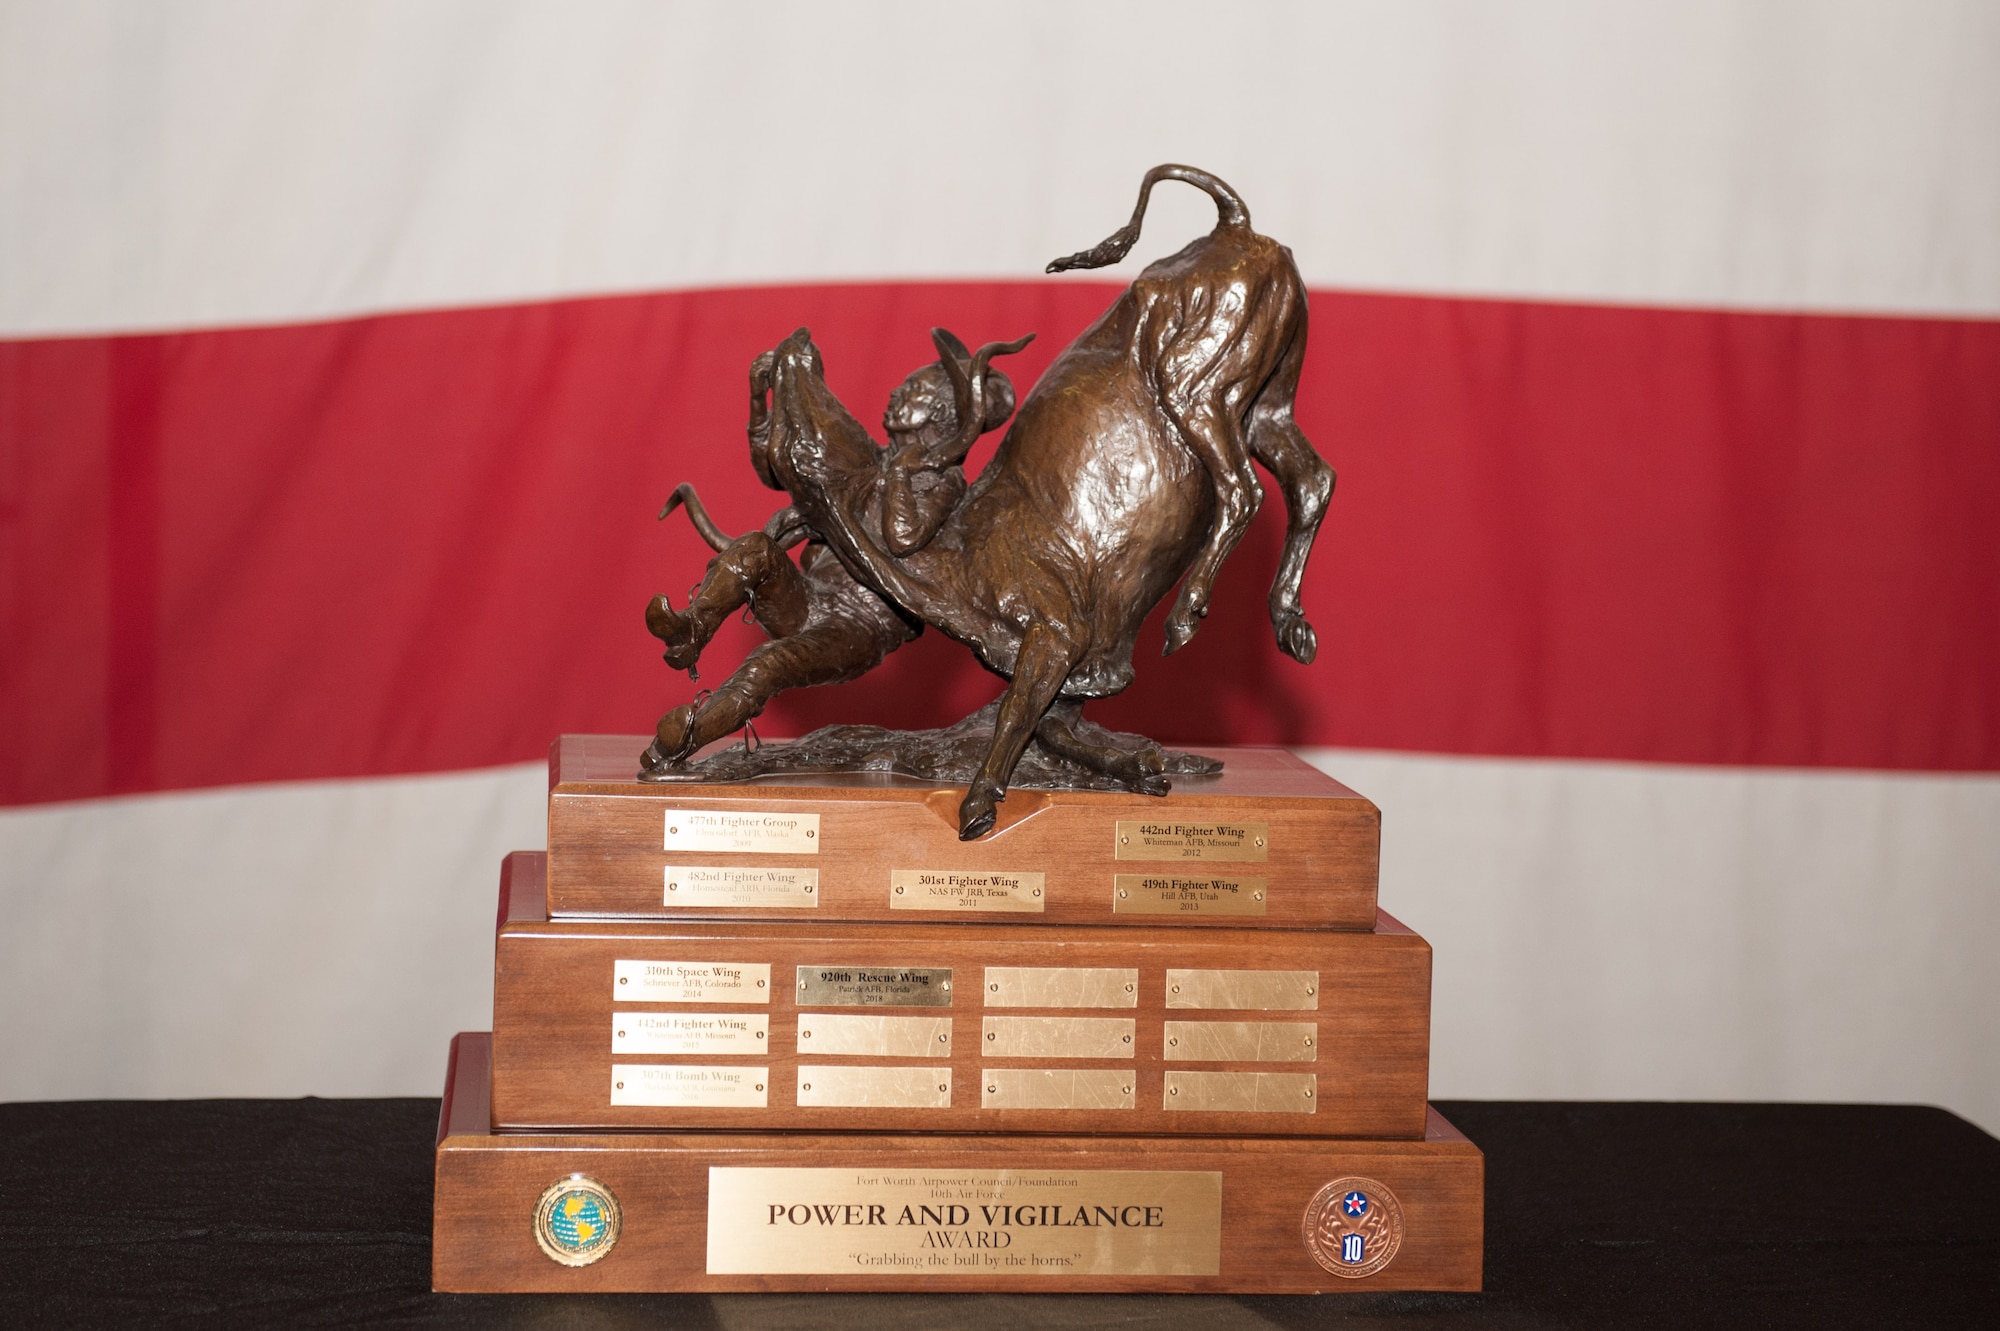 The Power and Vigilance Award is presented to the Tenth Air Force unit which best exhibits the Numbered Air Force's vision as "The premier provider of affordable, integrated, flexible and mission-ready Reserve Citizen Airmen to execute power and vigilance in support of U.S. National Security."